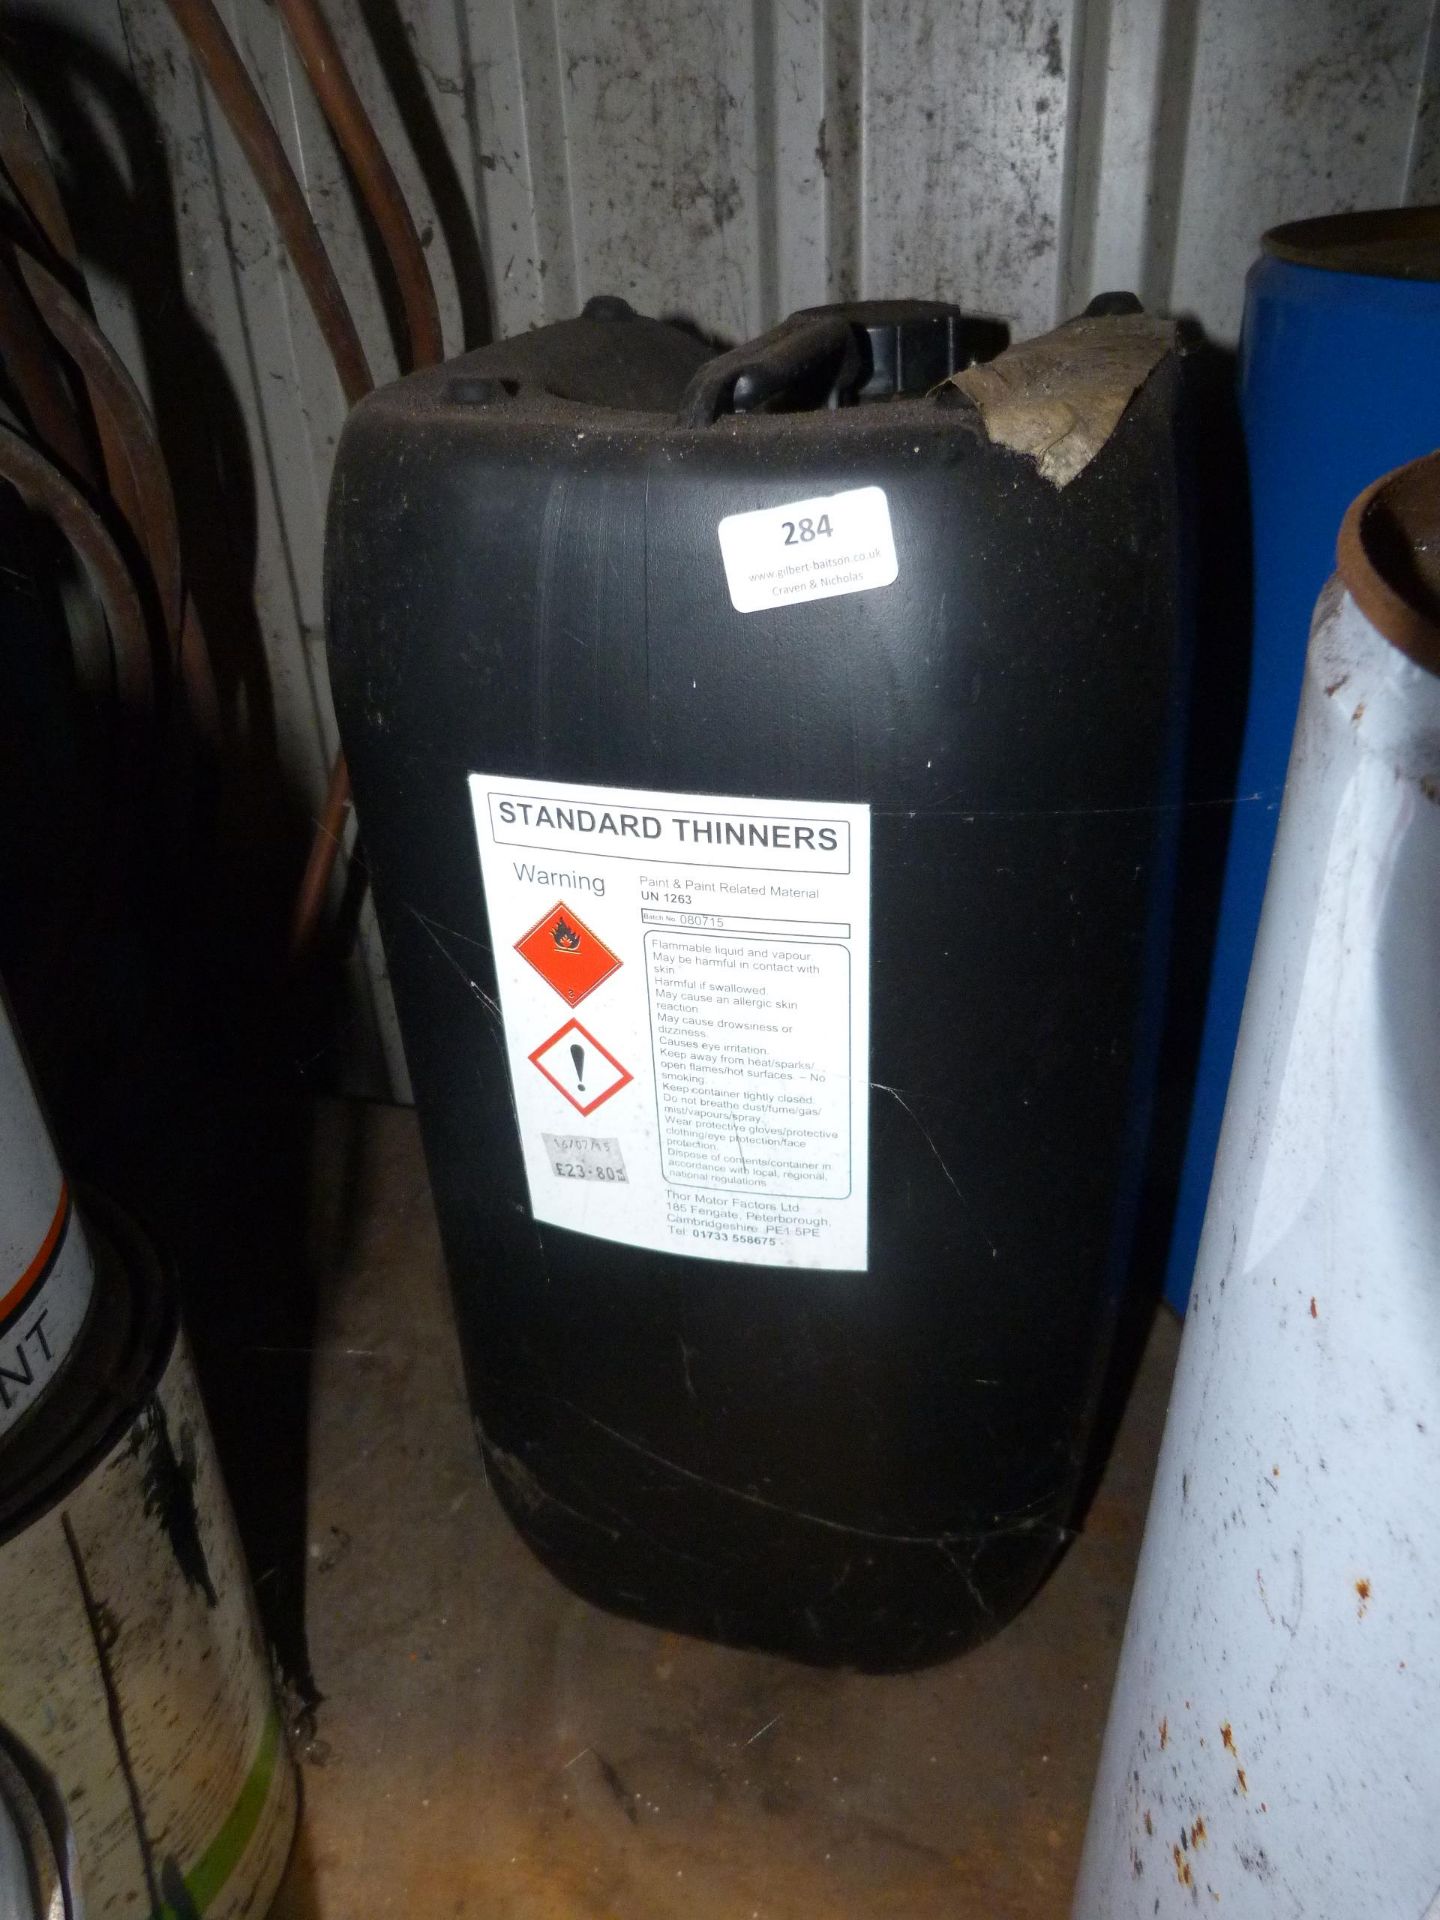 *20L of Standard Thinners